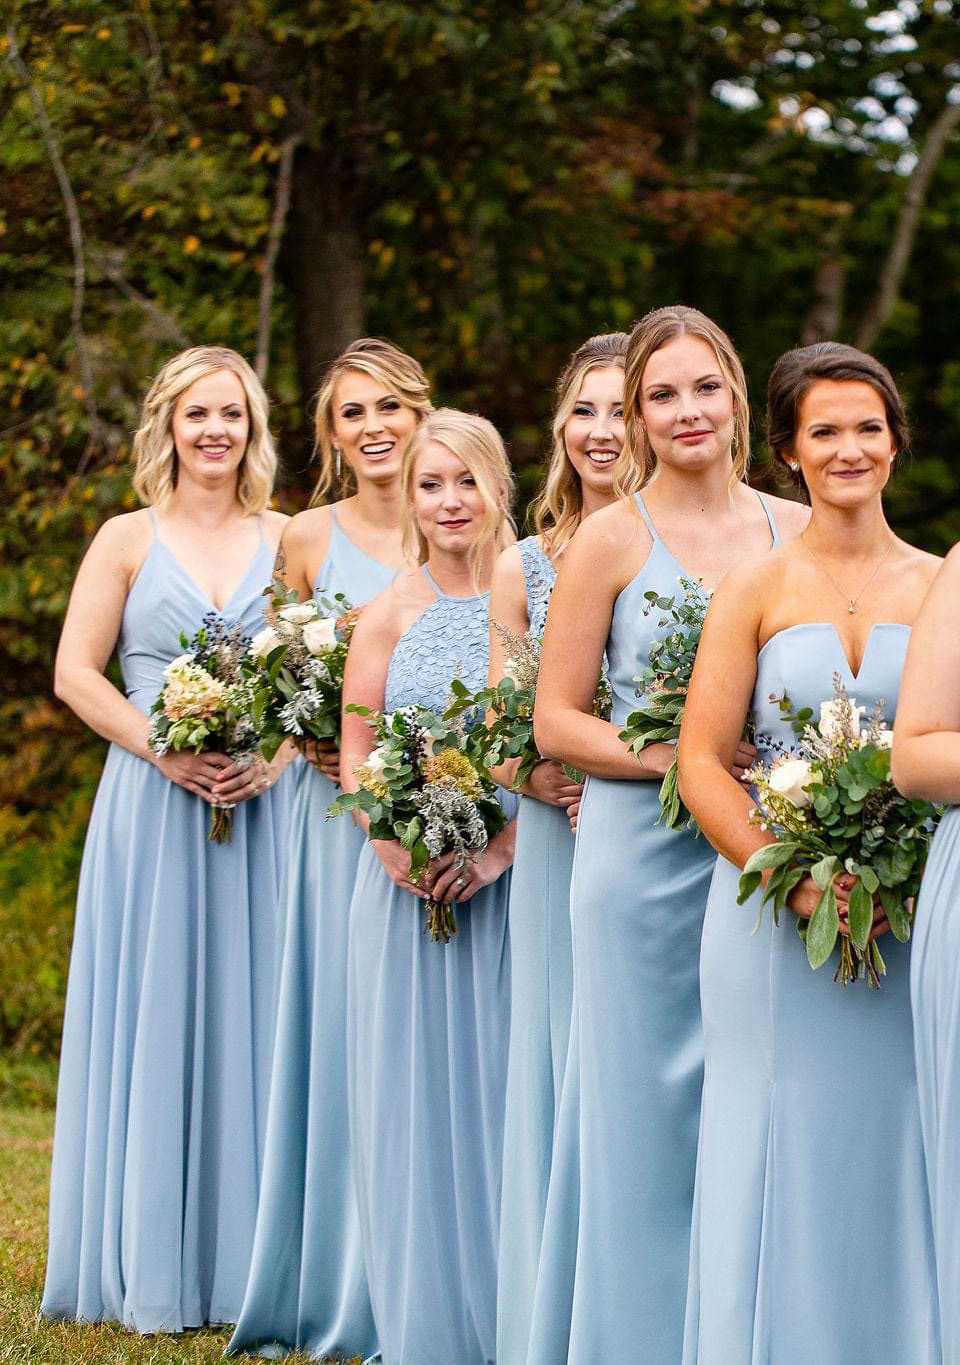 A Splash of Brilliance: Incorporating Color into Your Wedding Dress